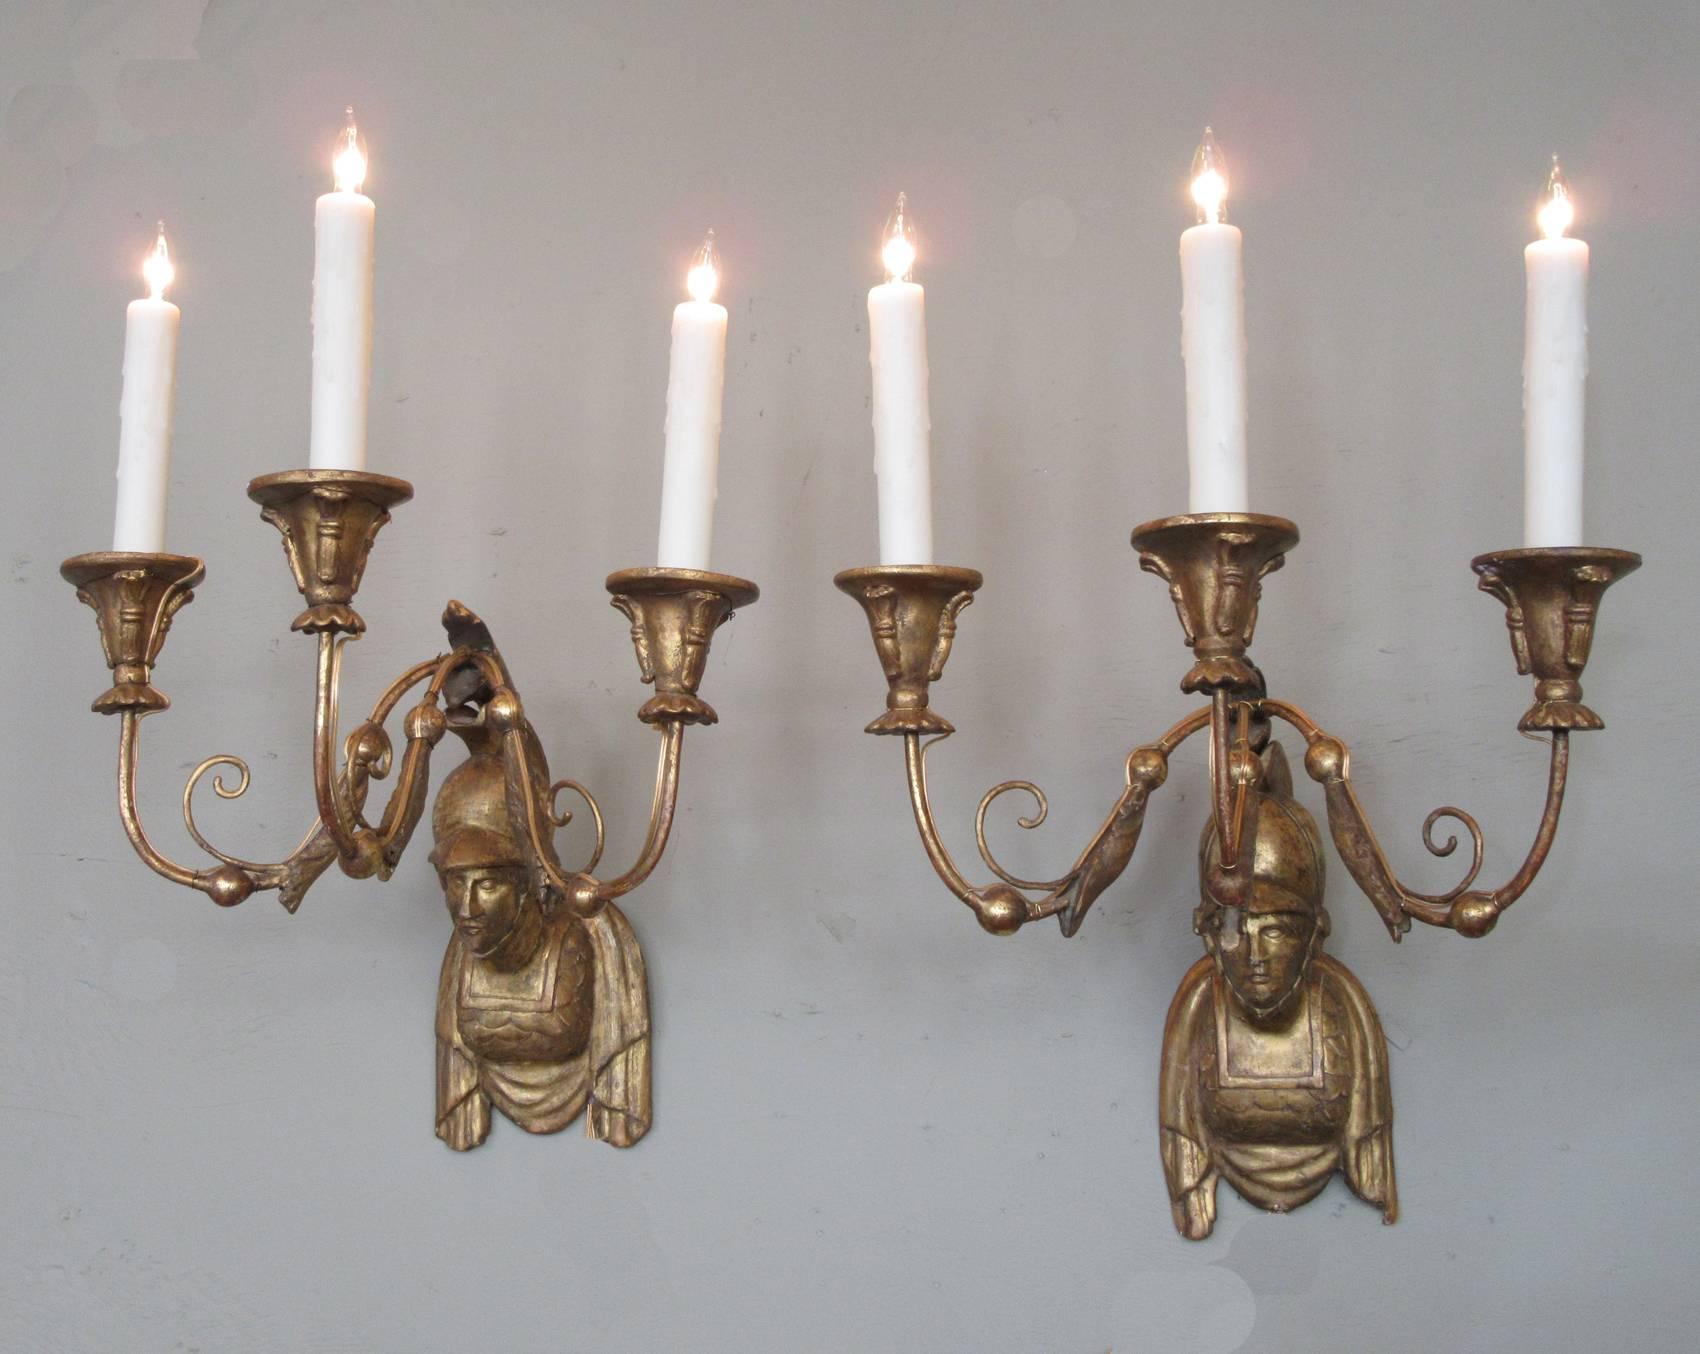 A pair of early 19th century Italian Neoclassical carved giltwood and tole sconces of busts of Roman soldiers, circa 1820, each with three candle arms.  The sconces have recently been wired with new porcelain sockets.